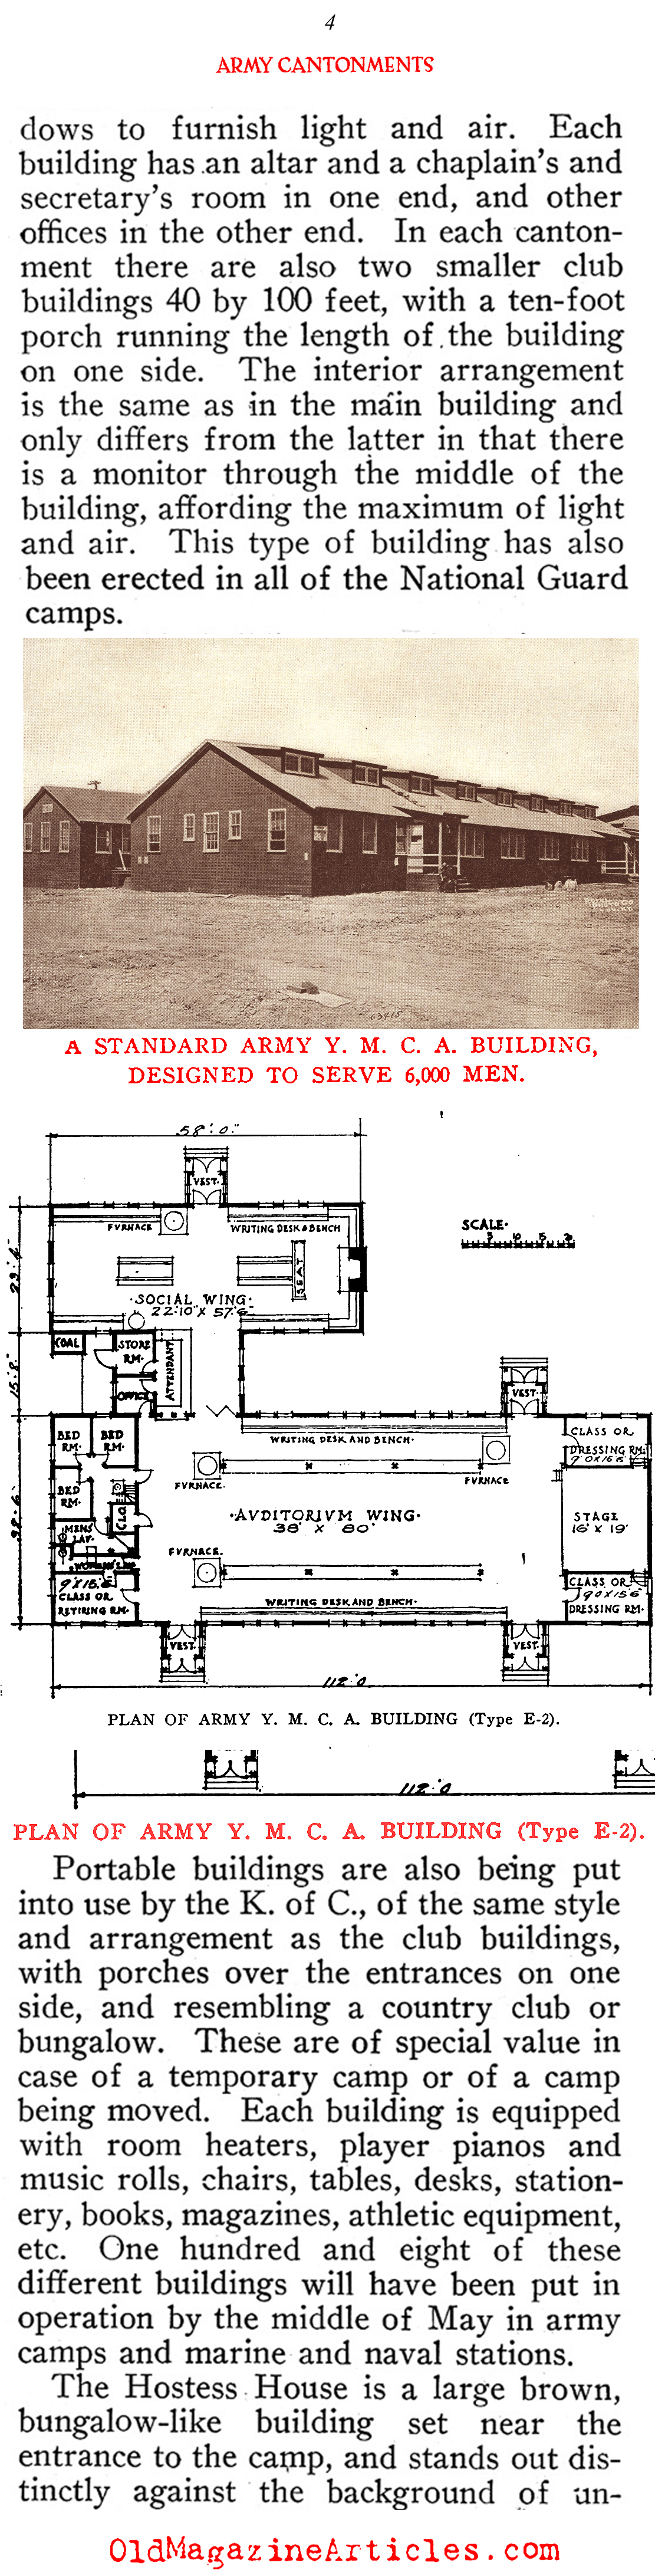 Relief Agency Structures on U.S. Army Camp Grounds (Architectural Record, 1918)